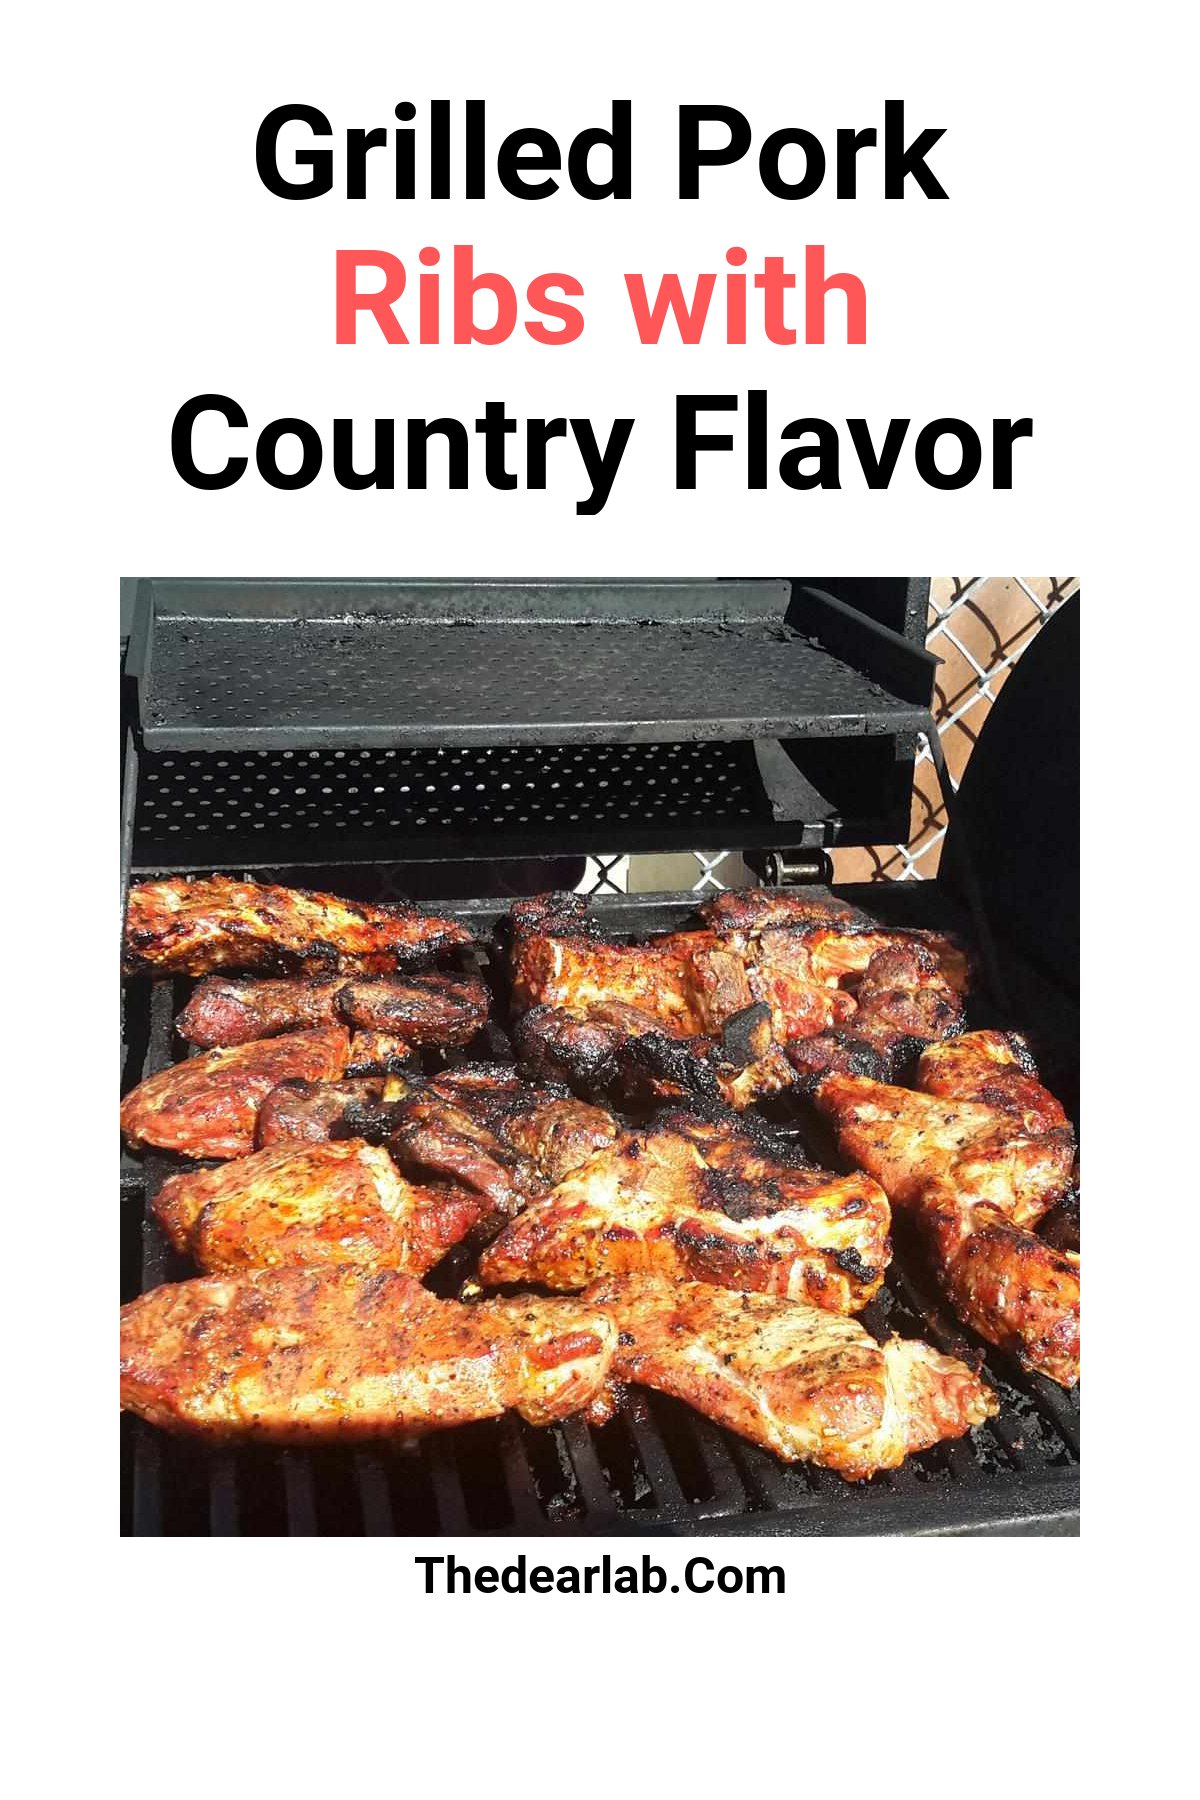 Grilled Country-Style Ribs